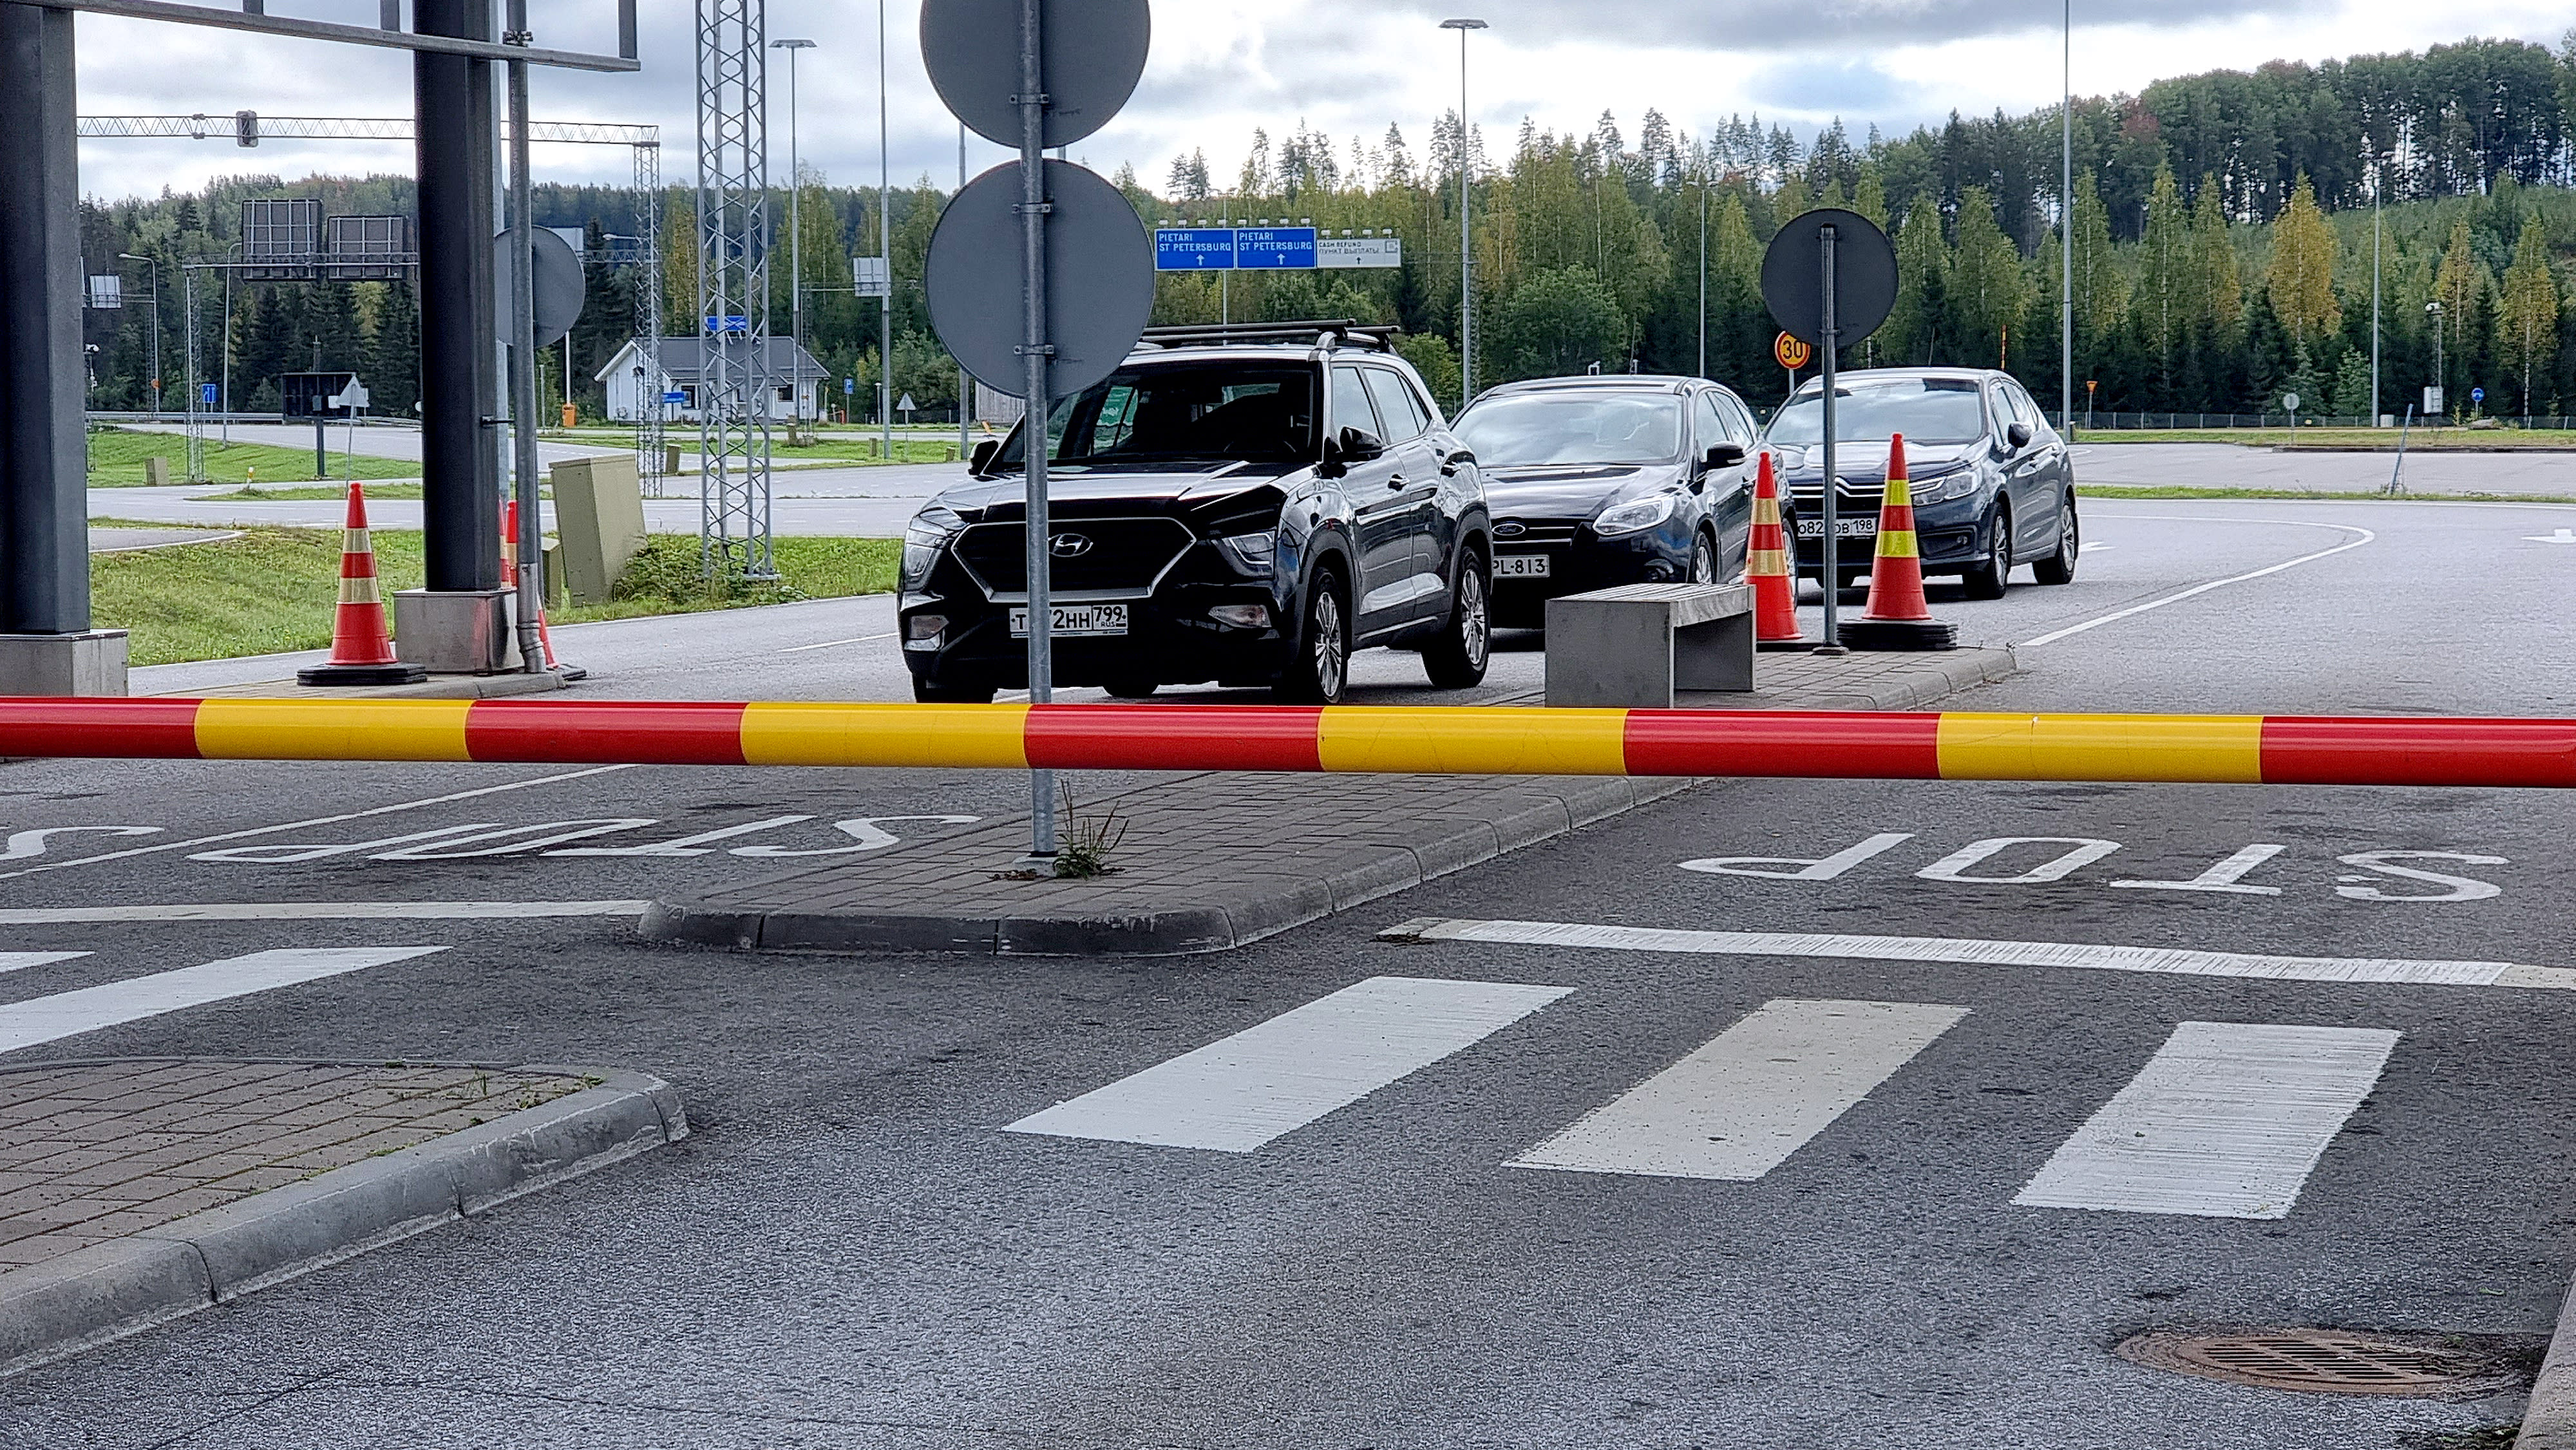 According to the Border Guard, Finland has banned Russian cars